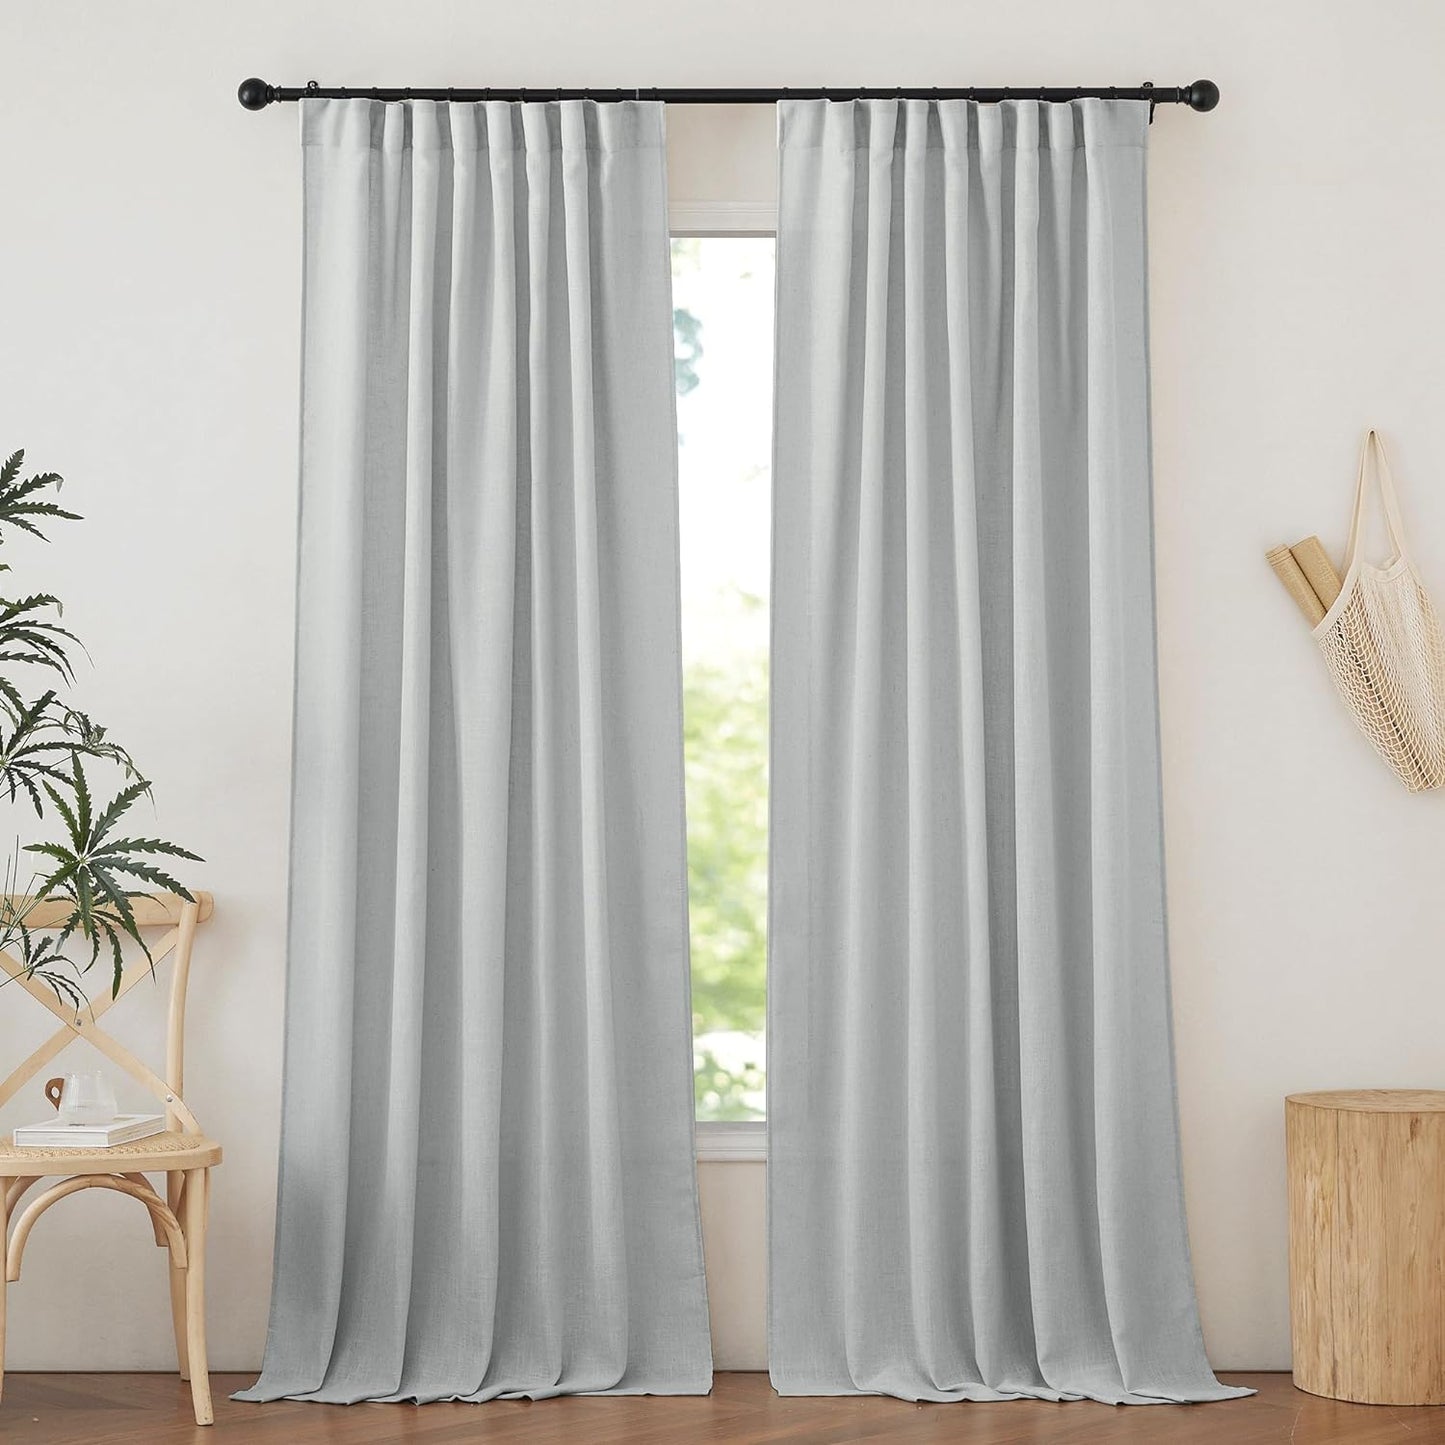 NICETOWN White Curtains Sheer - Semi Sheer Window Covering, Light & Airy Privacy Rod Pocket Back Tab Pinche Pleated Drapes for Bedroom Living Room Patio Glass Door, 52 X 63 Inches Long, Set of 2  NICETOWN Light Grey W52 X L84 